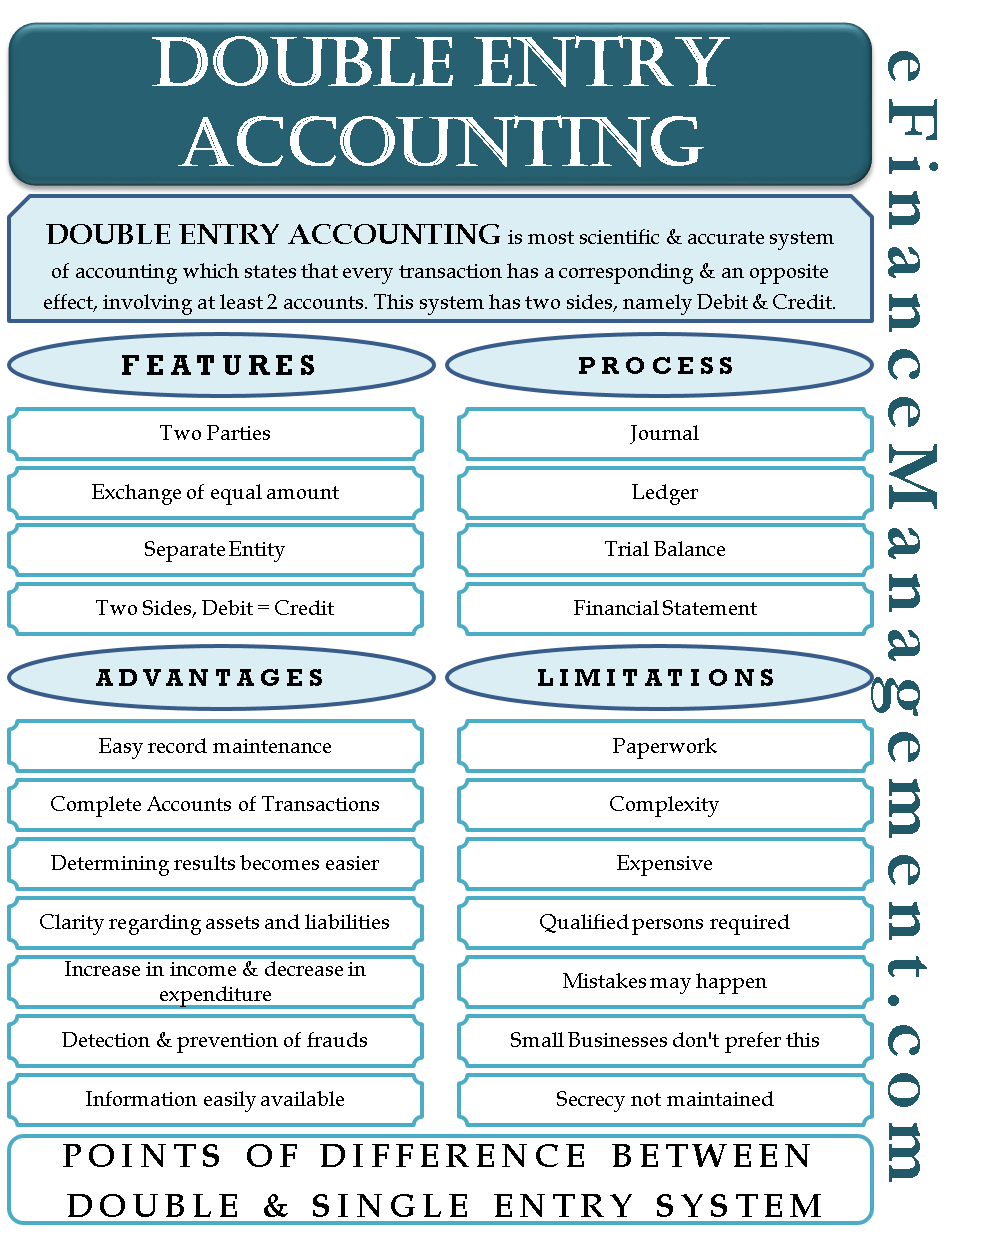 double entry accounting features rules process pros cons examples cash flow statement app